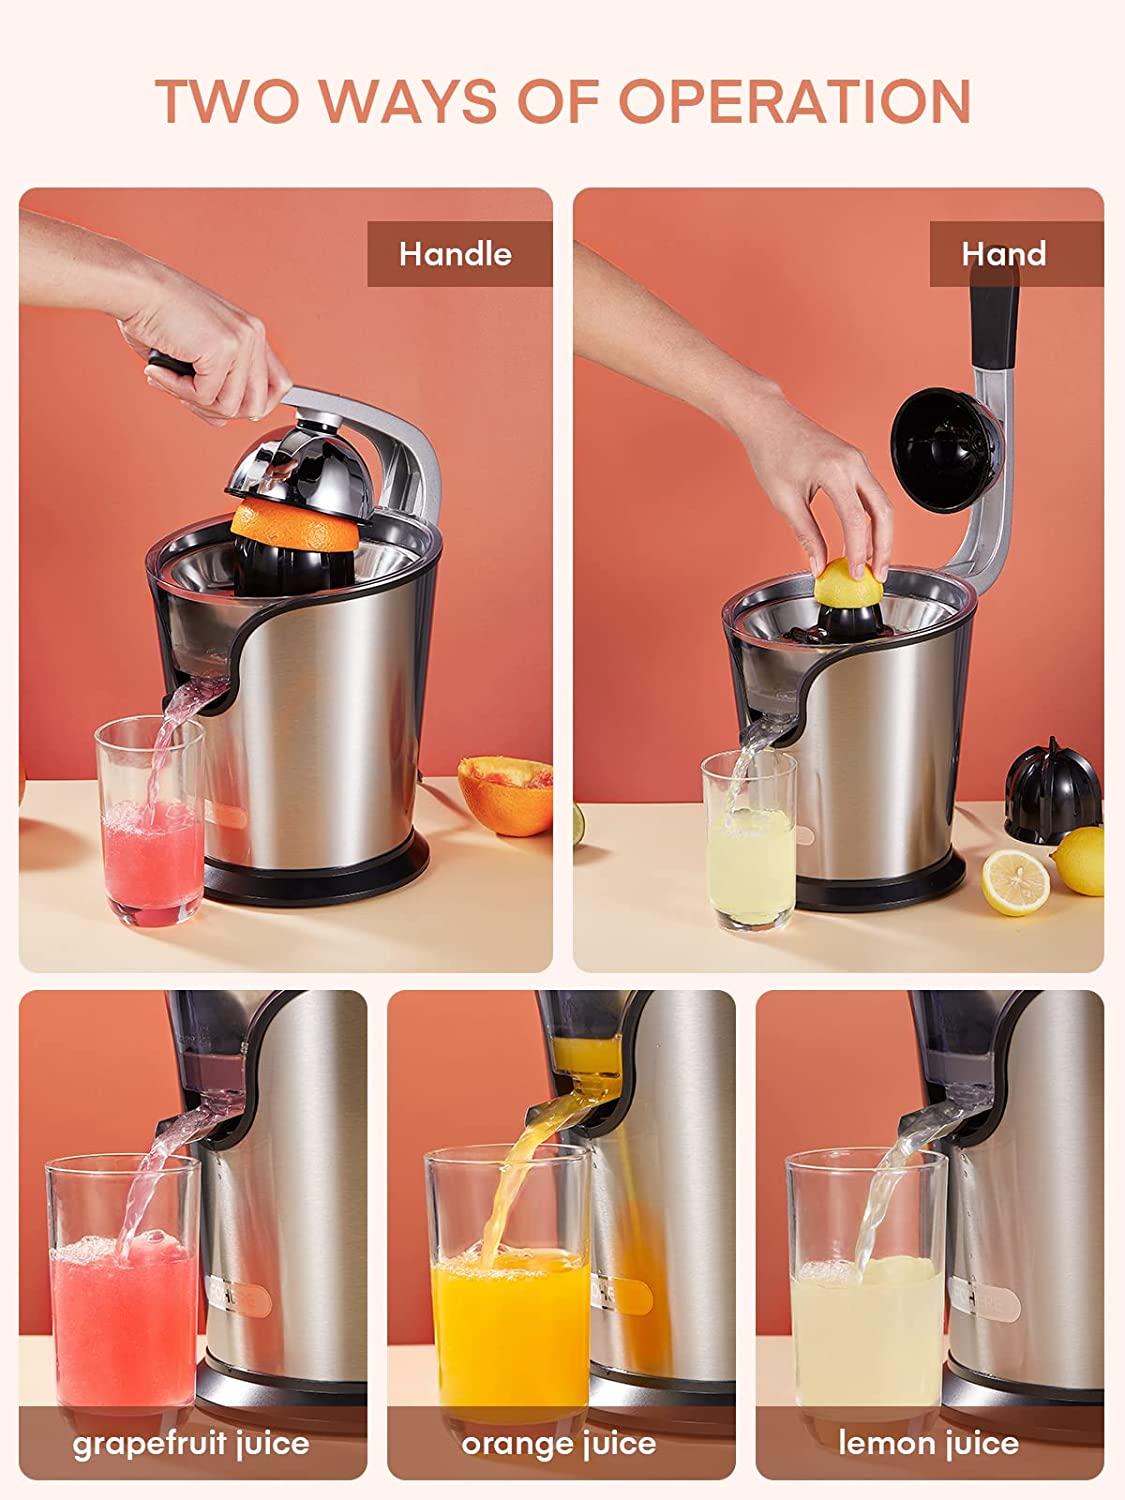 two ways of operation, FOHERE Citrus Juicer Electric Orange Juicer Squeezer with Humanized Handle, Powerful 160W Silent Motor Stainless Steel BPA-Free, Two Size Cones for Grapefruits, Orange and Lemon, Silver